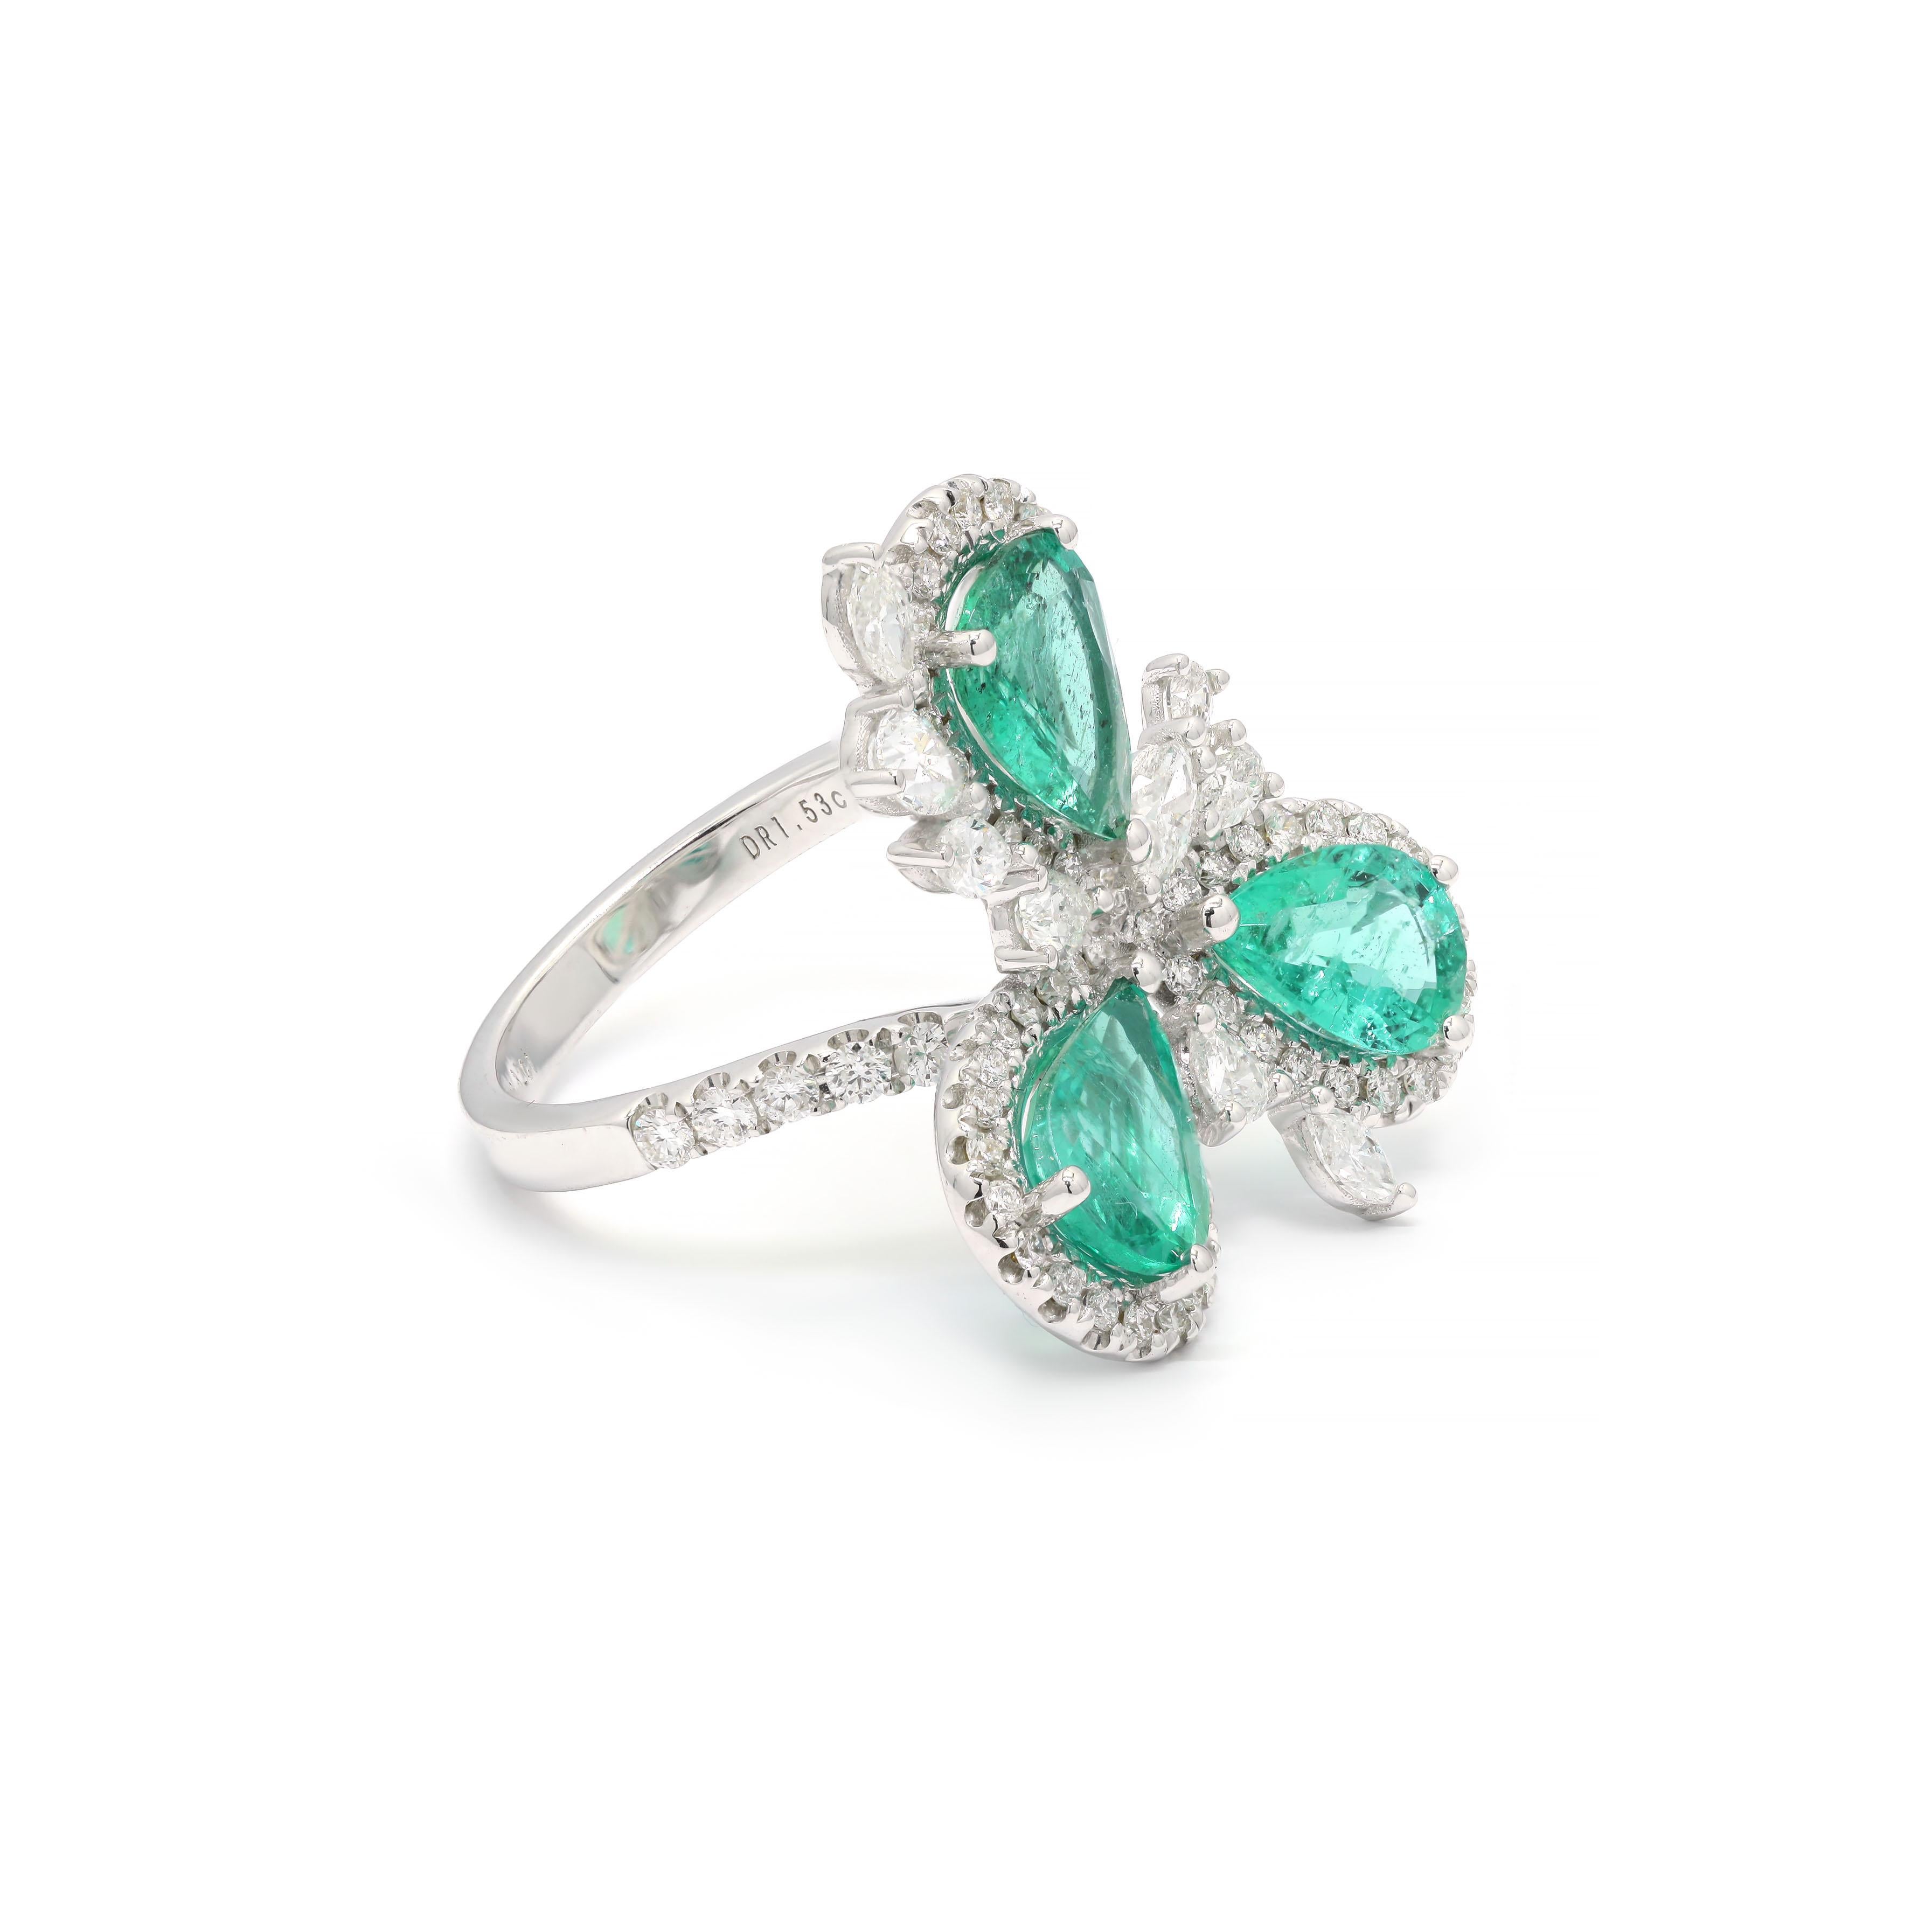 For Sale:  Magnificent 3.32 ct Emerald Cocktail Ring in 14K White Gold with Diamonds 2